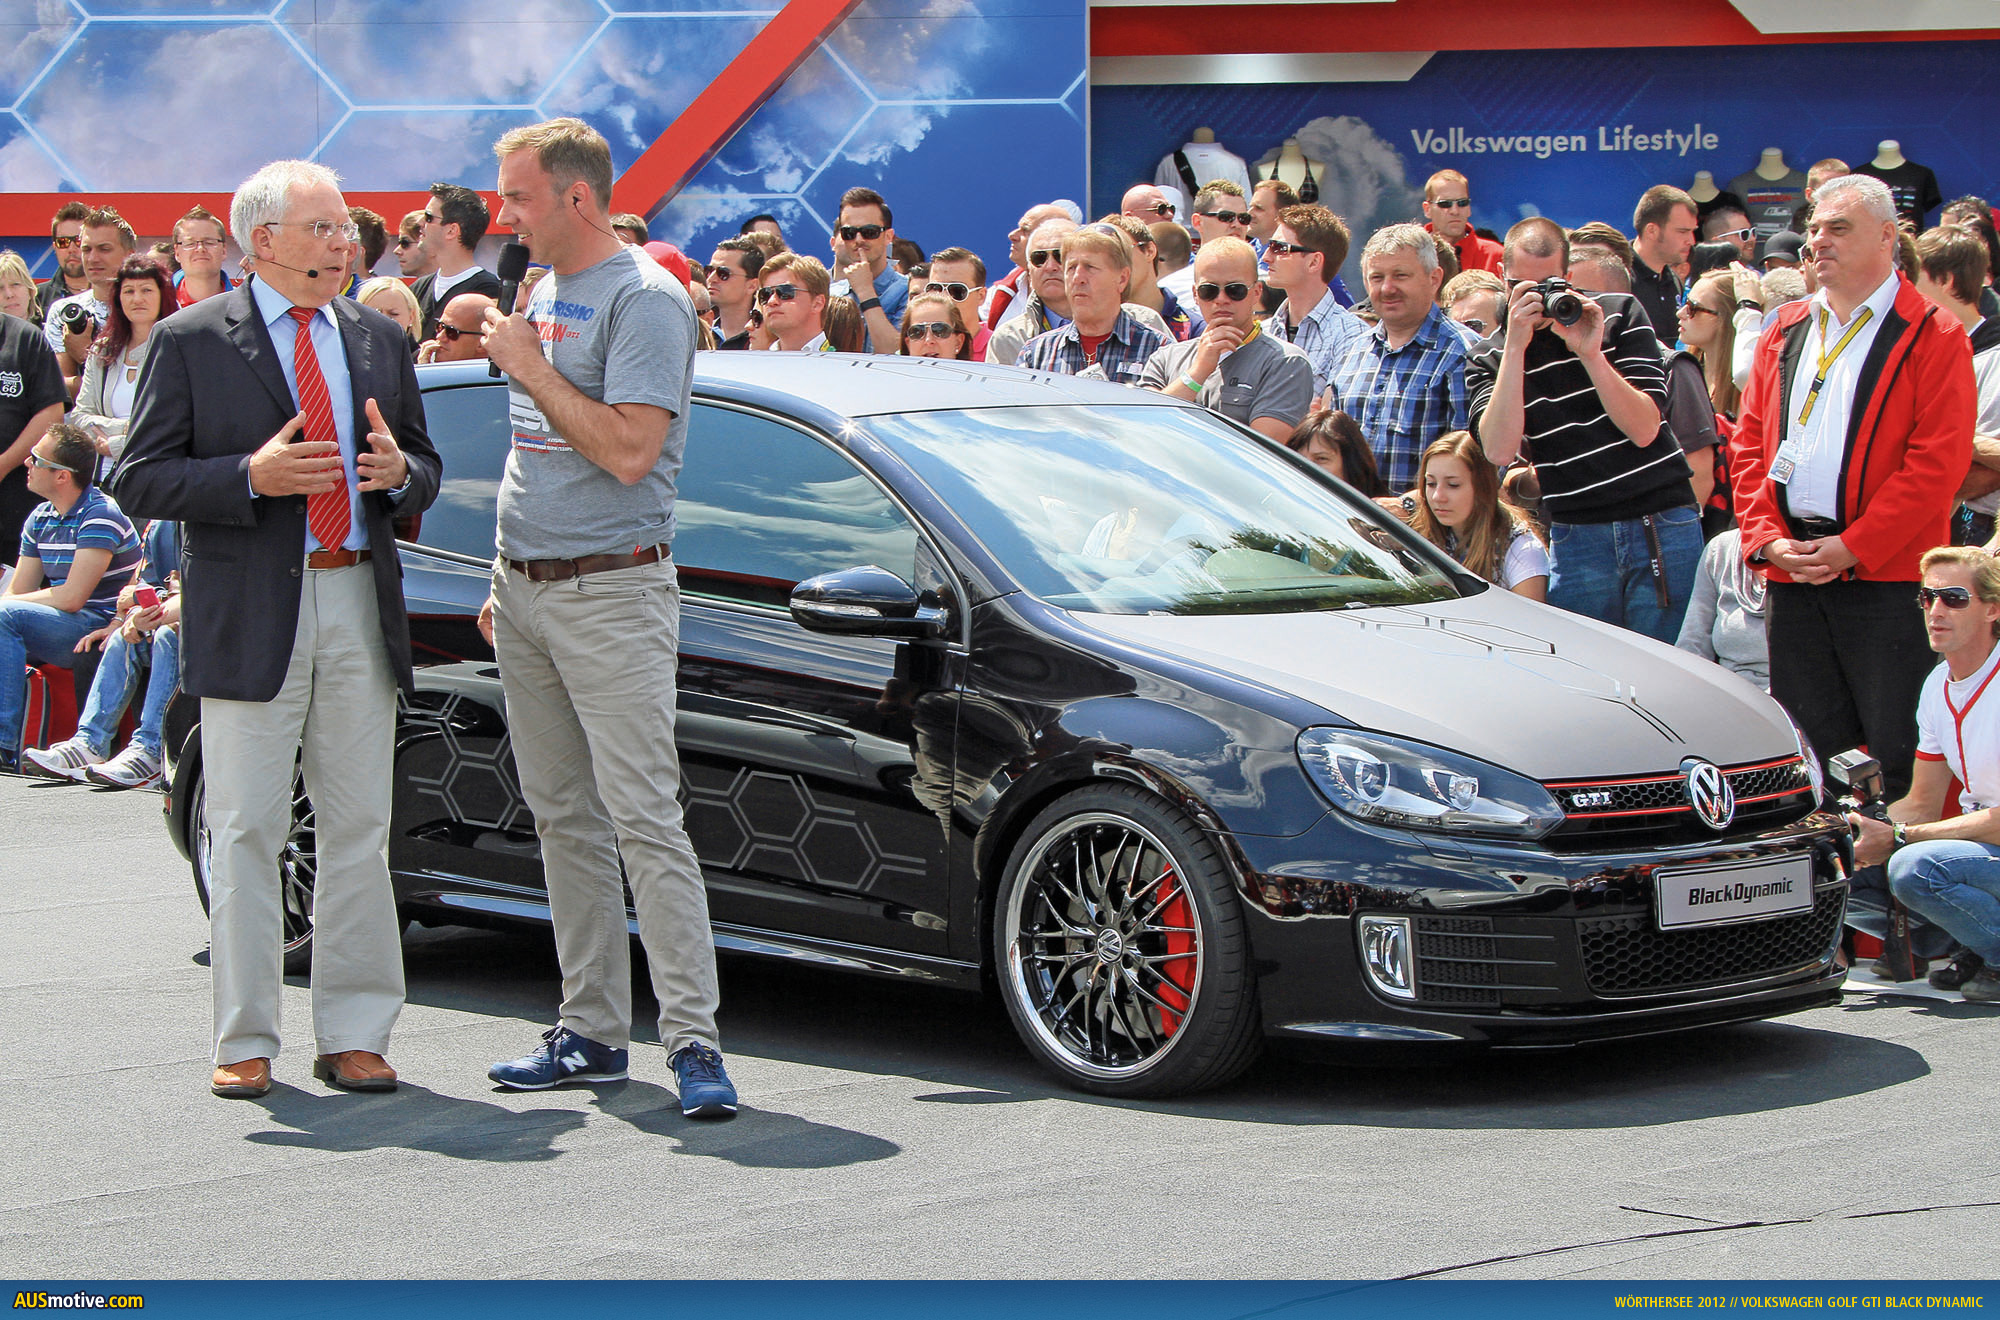 VW Golf GTI Black Dynamic at 2012 GTI Festival in Worthersee - Web Exclusive